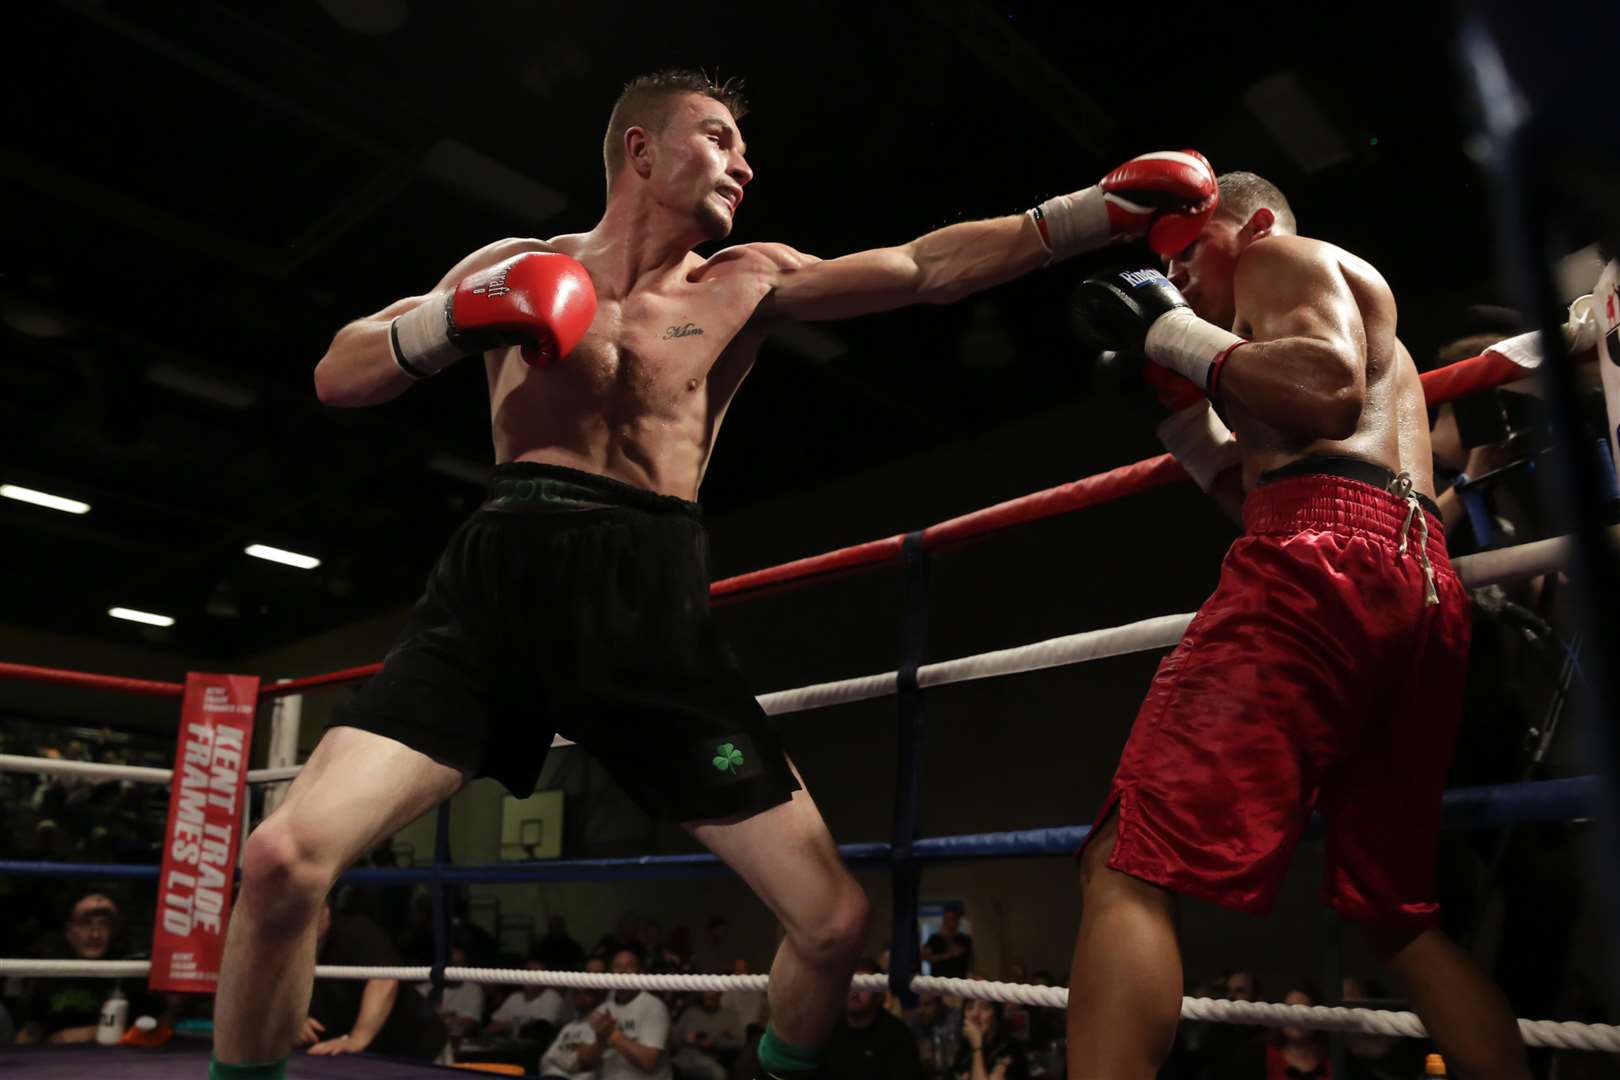 Louis Greene (black) Vs Geiboord Omier (red) in a super lightweight bout. Picture: Countrywide Photographic